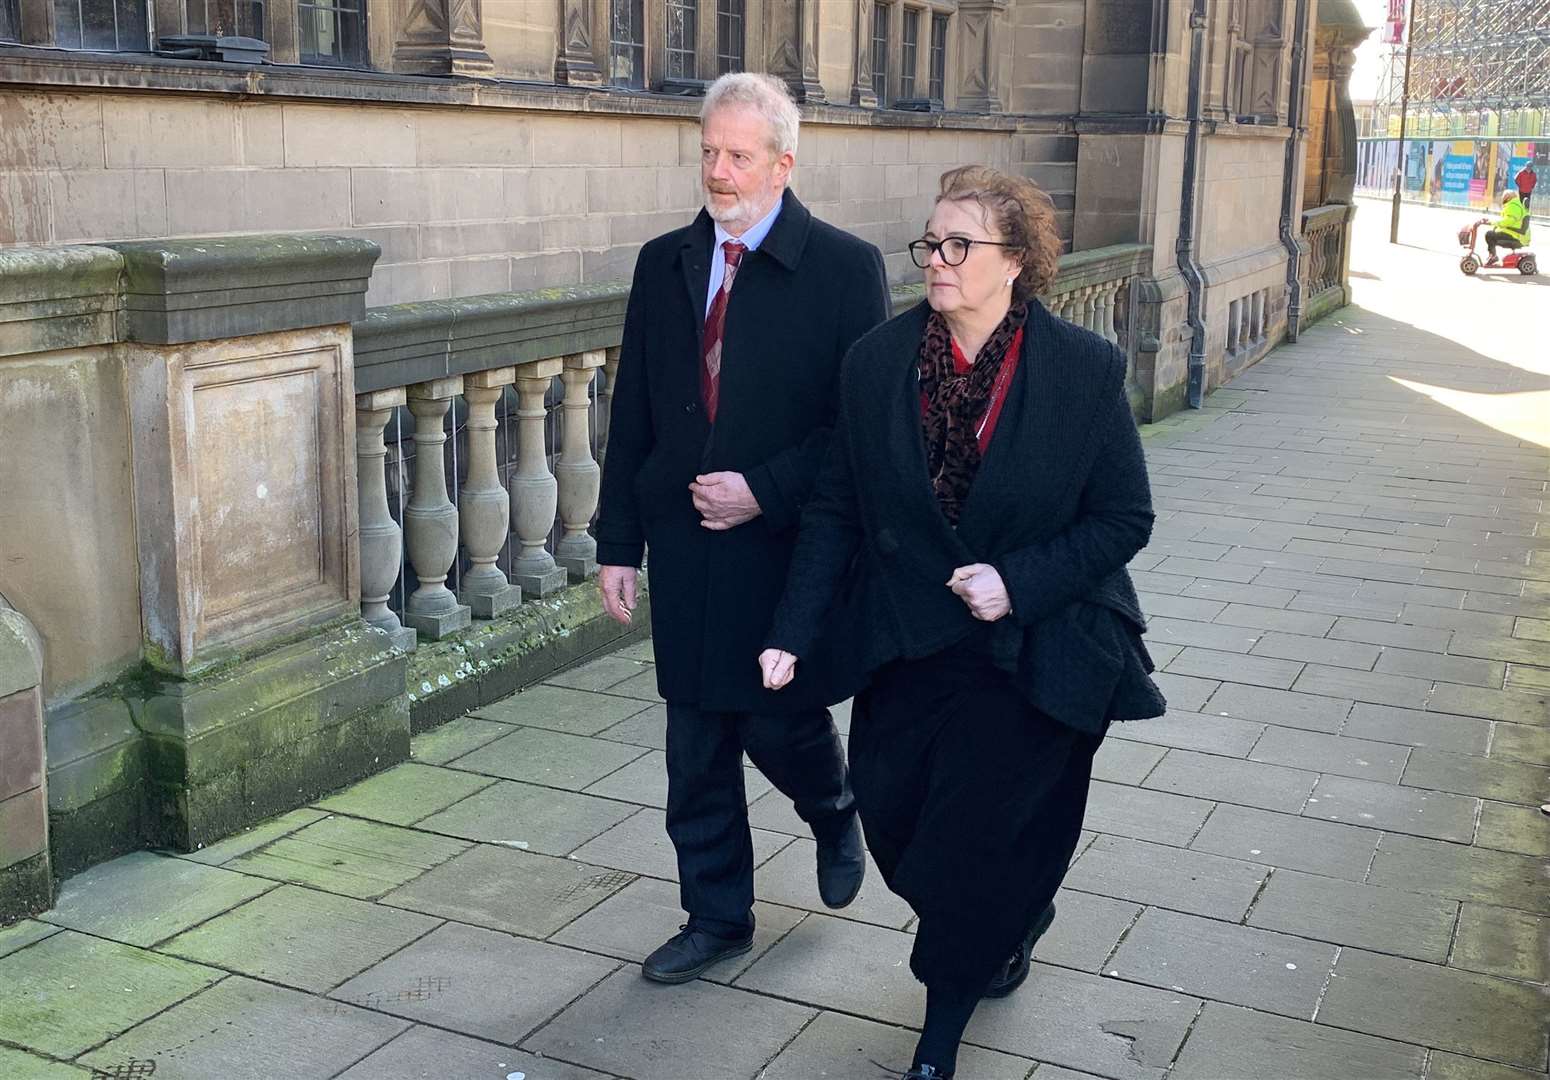 Charles and Liz Ritchie arrive at Sheffield Town Hall (Dave Higgens/PA)